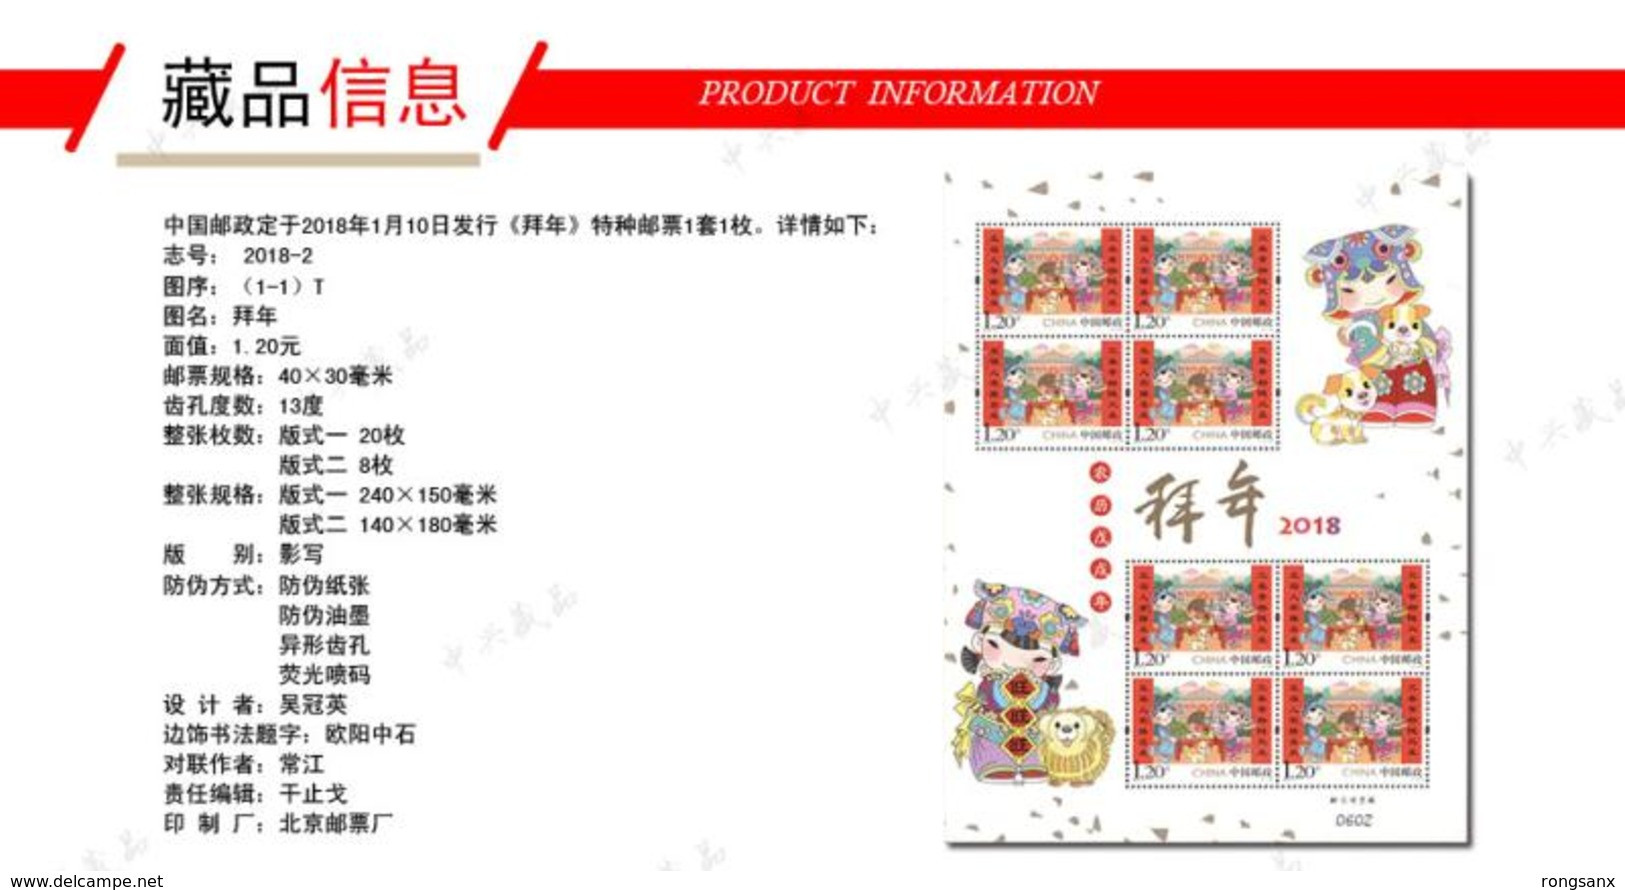 China 2018 SHEETLET YEAR PACK INCLUDE 15 SHEETLETS SEE PIC INCLUDE ALBUM - Annate Complete